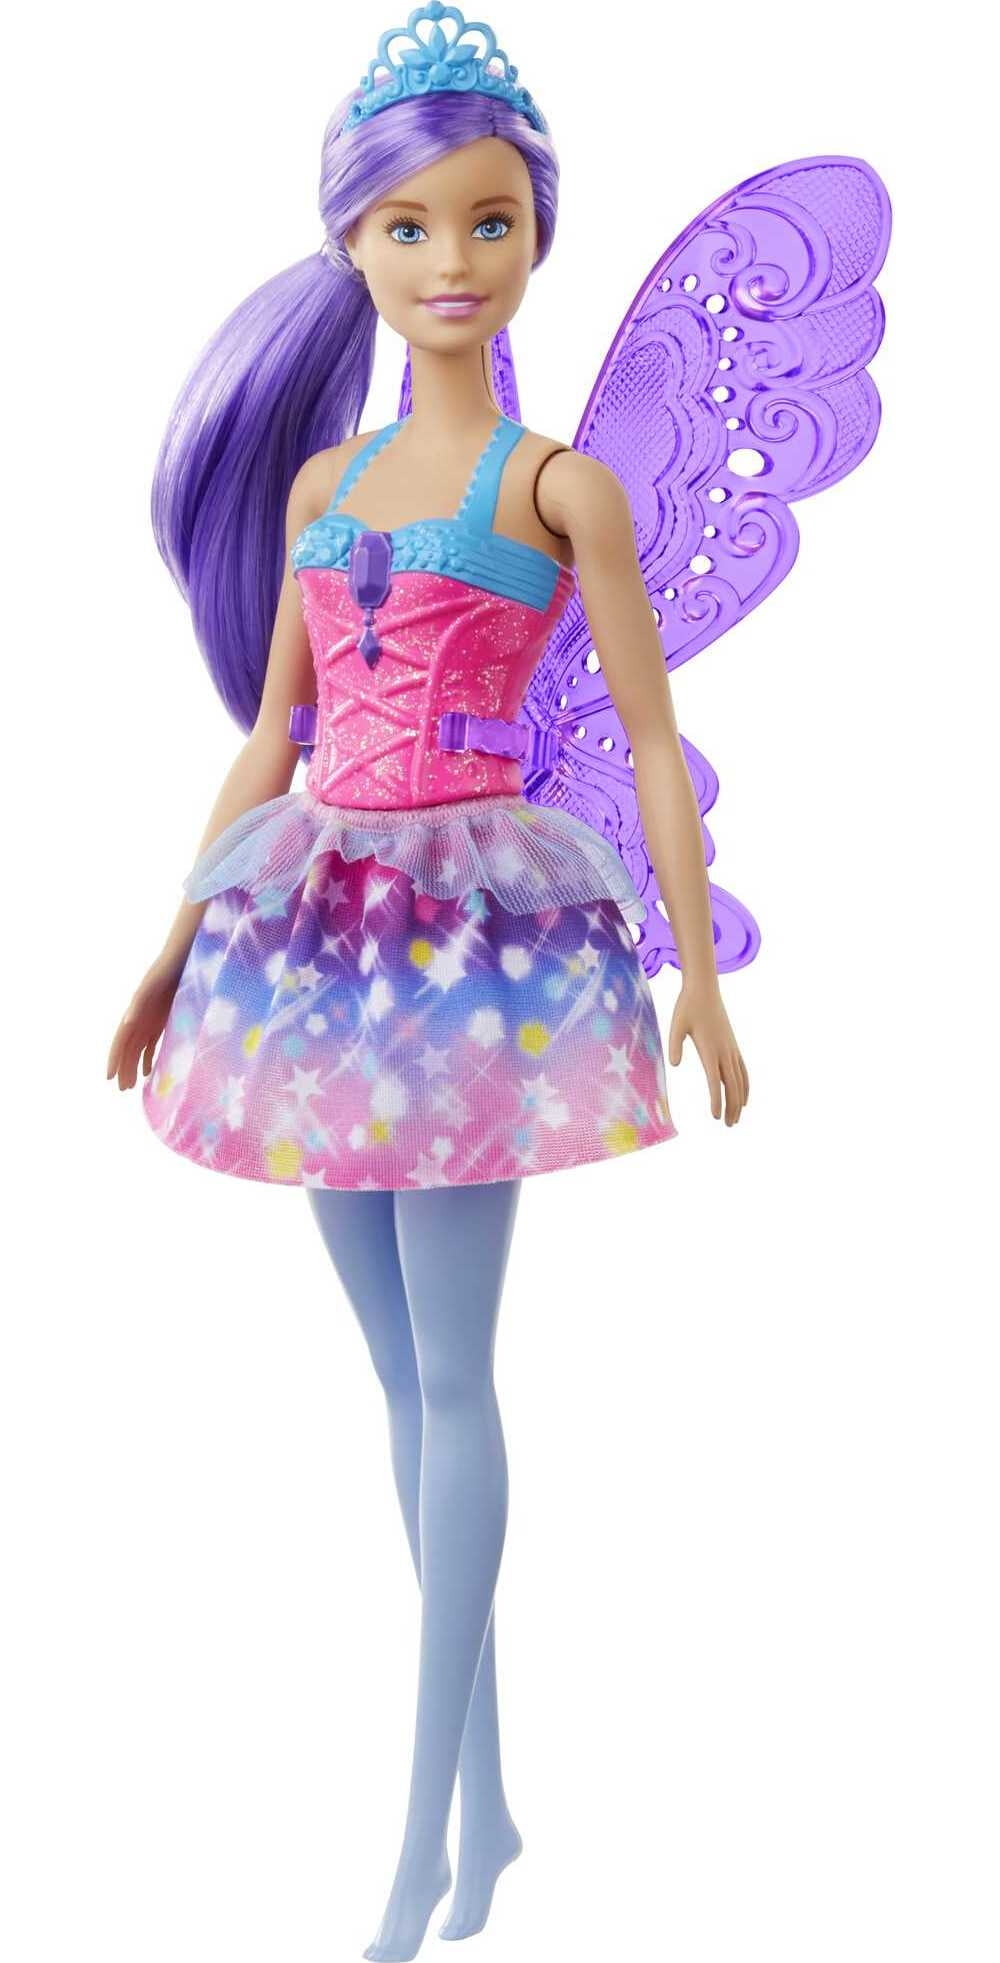 Barbie Dreamtopia Fairy Doll with Purple Hair, Removable Wings